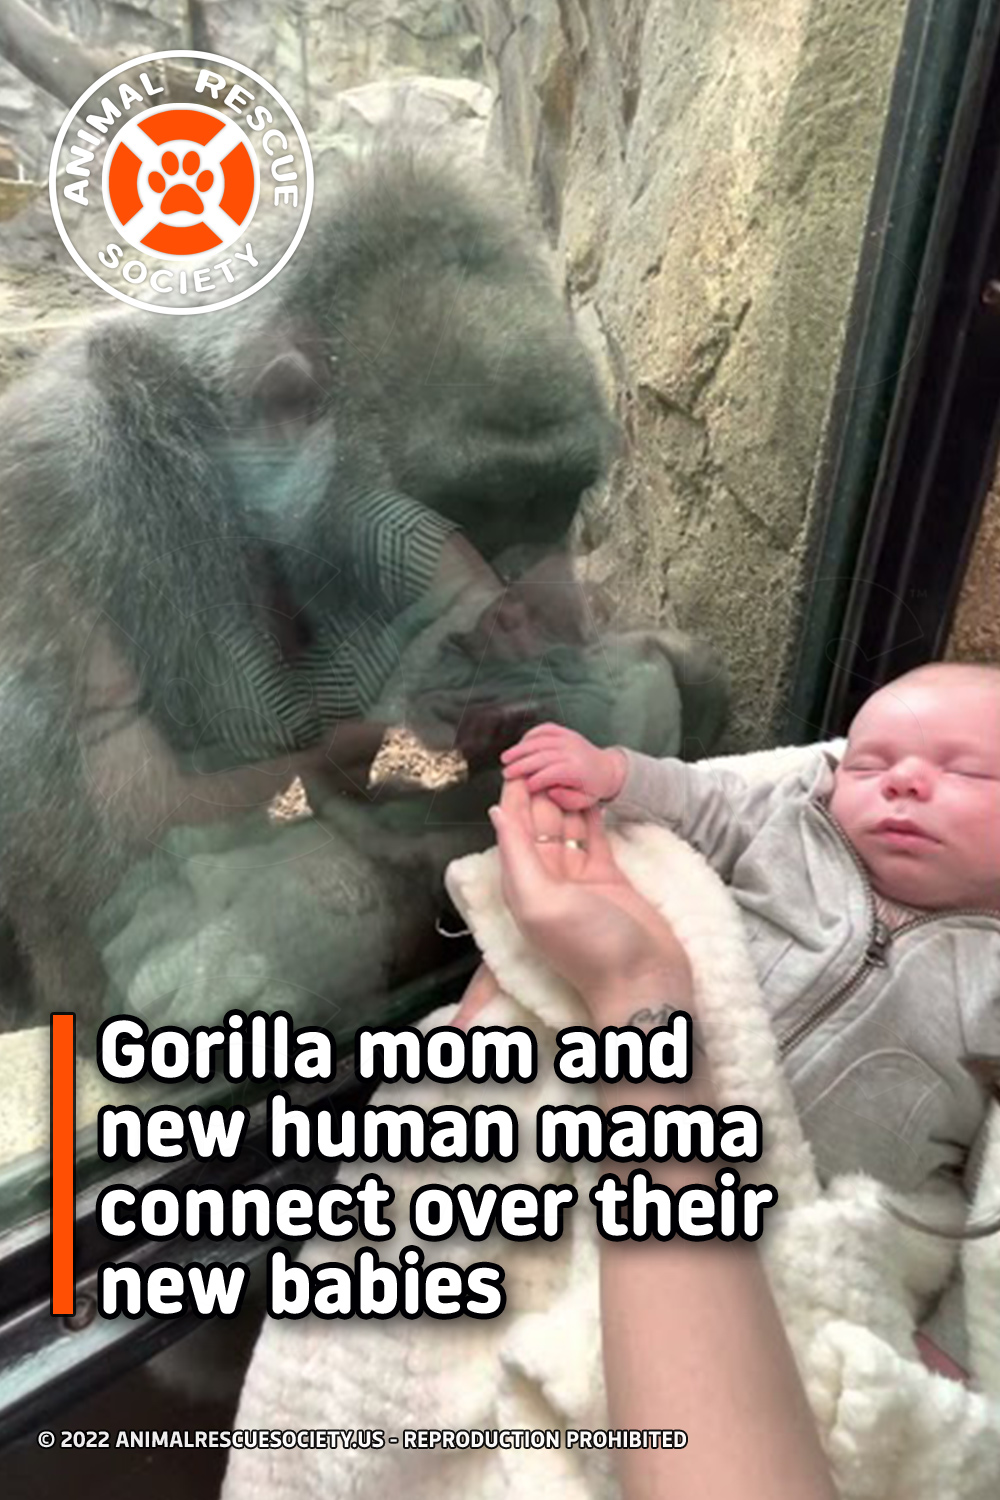 Gorilla mom and new human mama connect over their new babies